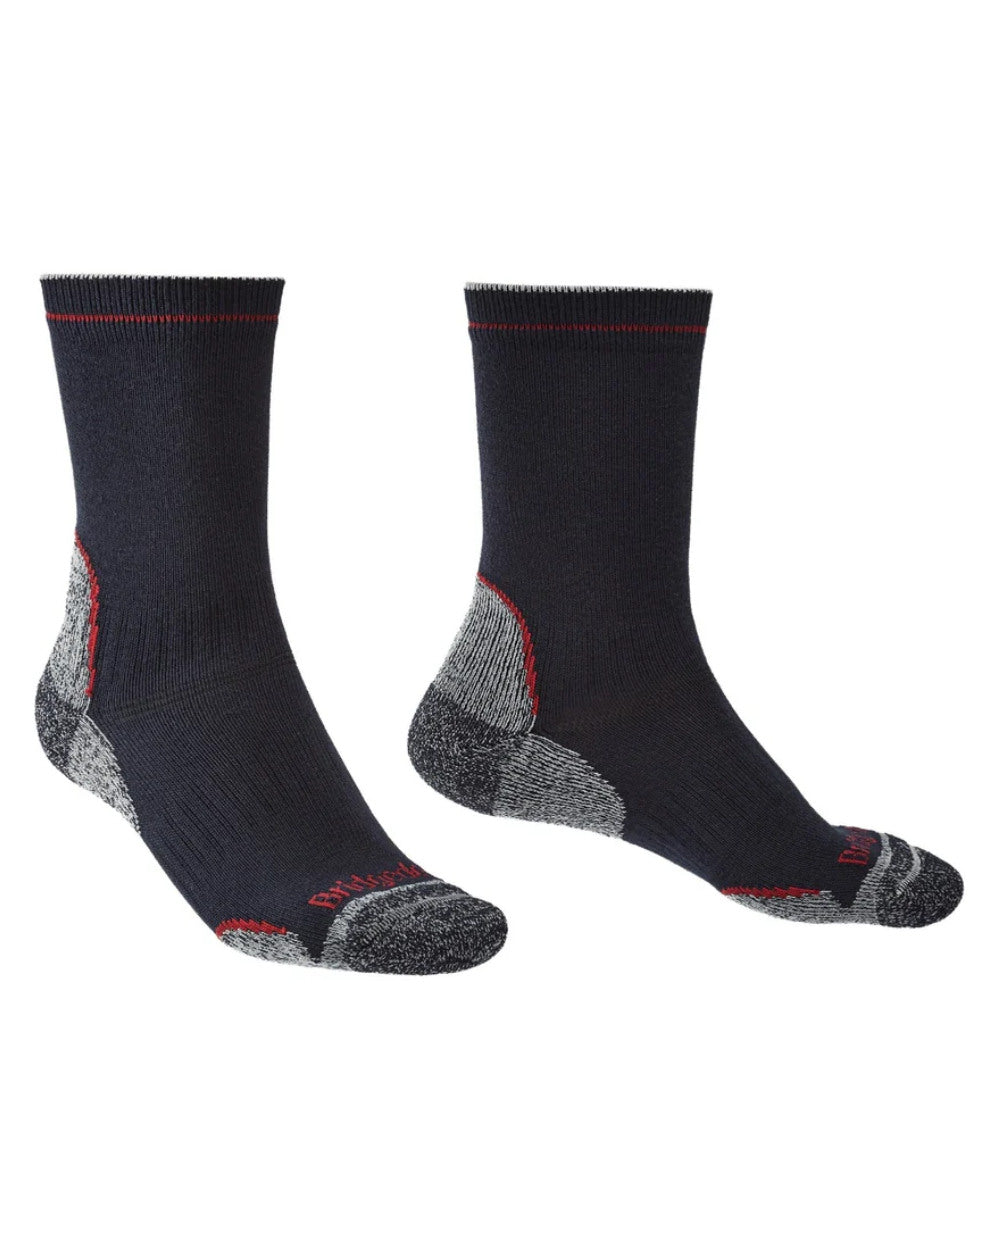 Navy/Red Coloured Bridgedale Mens Lightweight T2 Coolmax Performance Boot Socks On A White Background 